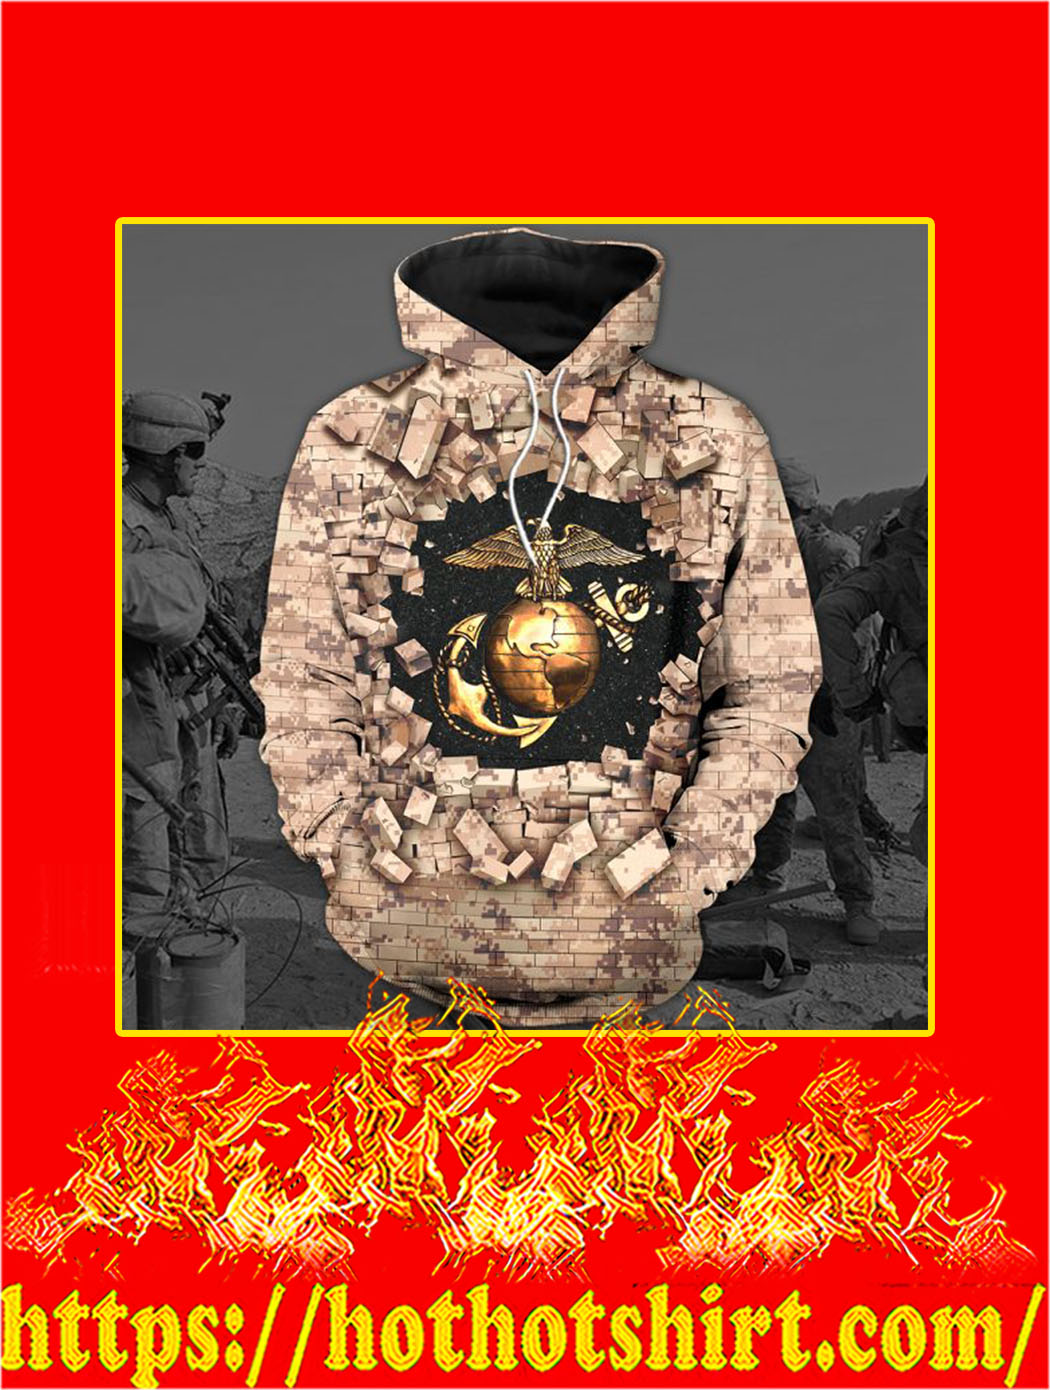 3D Printed Firefighter Camo Wall Clothing Hoodie, T-shirt and Sweatshirt